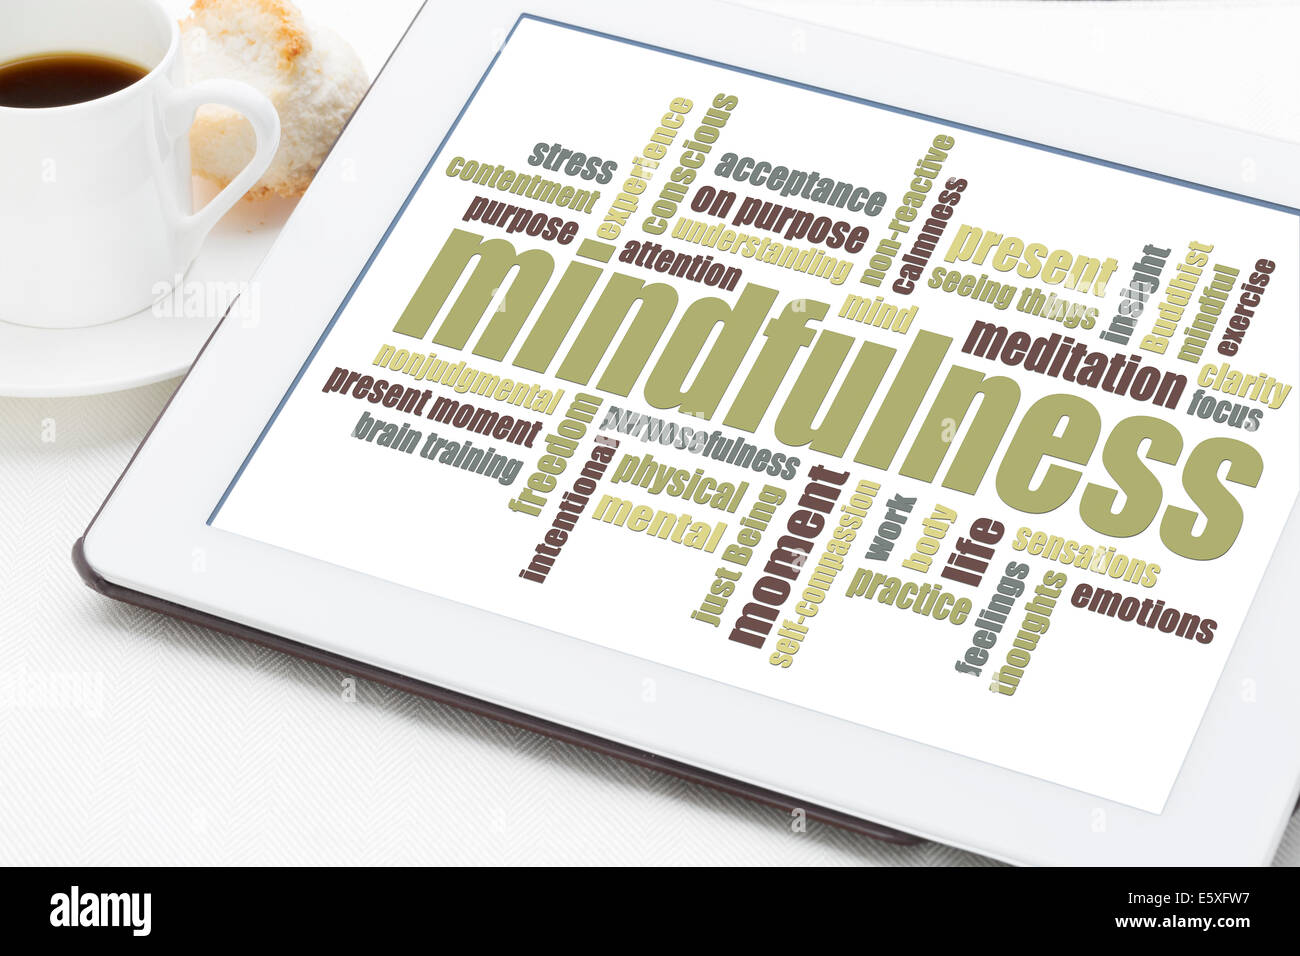 mindfulness word cloud on a digital tablet with a cup of coffee Stock Photo